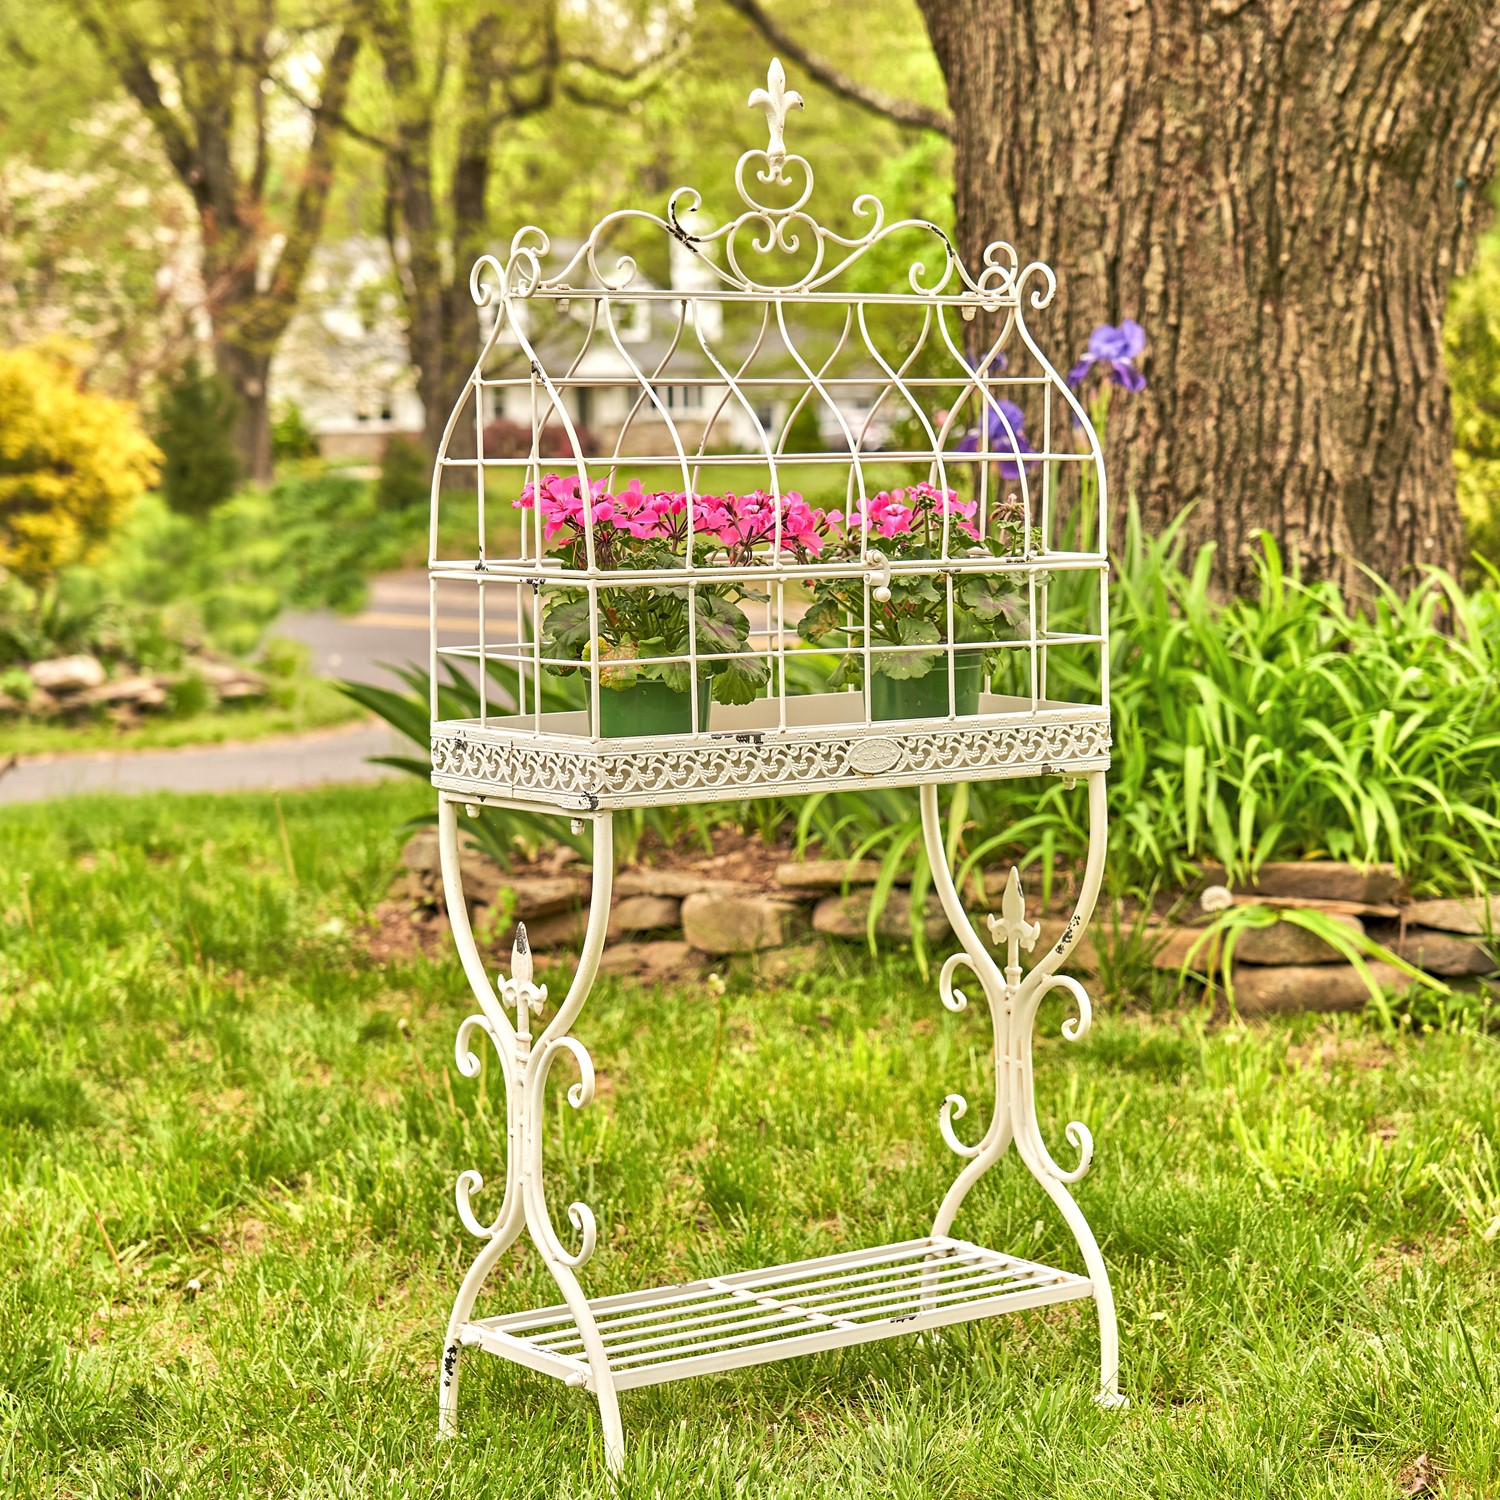 Zaer Ltd. International Pre-Order: 42.5" Tall Iron Cage Plant Stand in Antique White "Paris 1968" ZR190422-AW